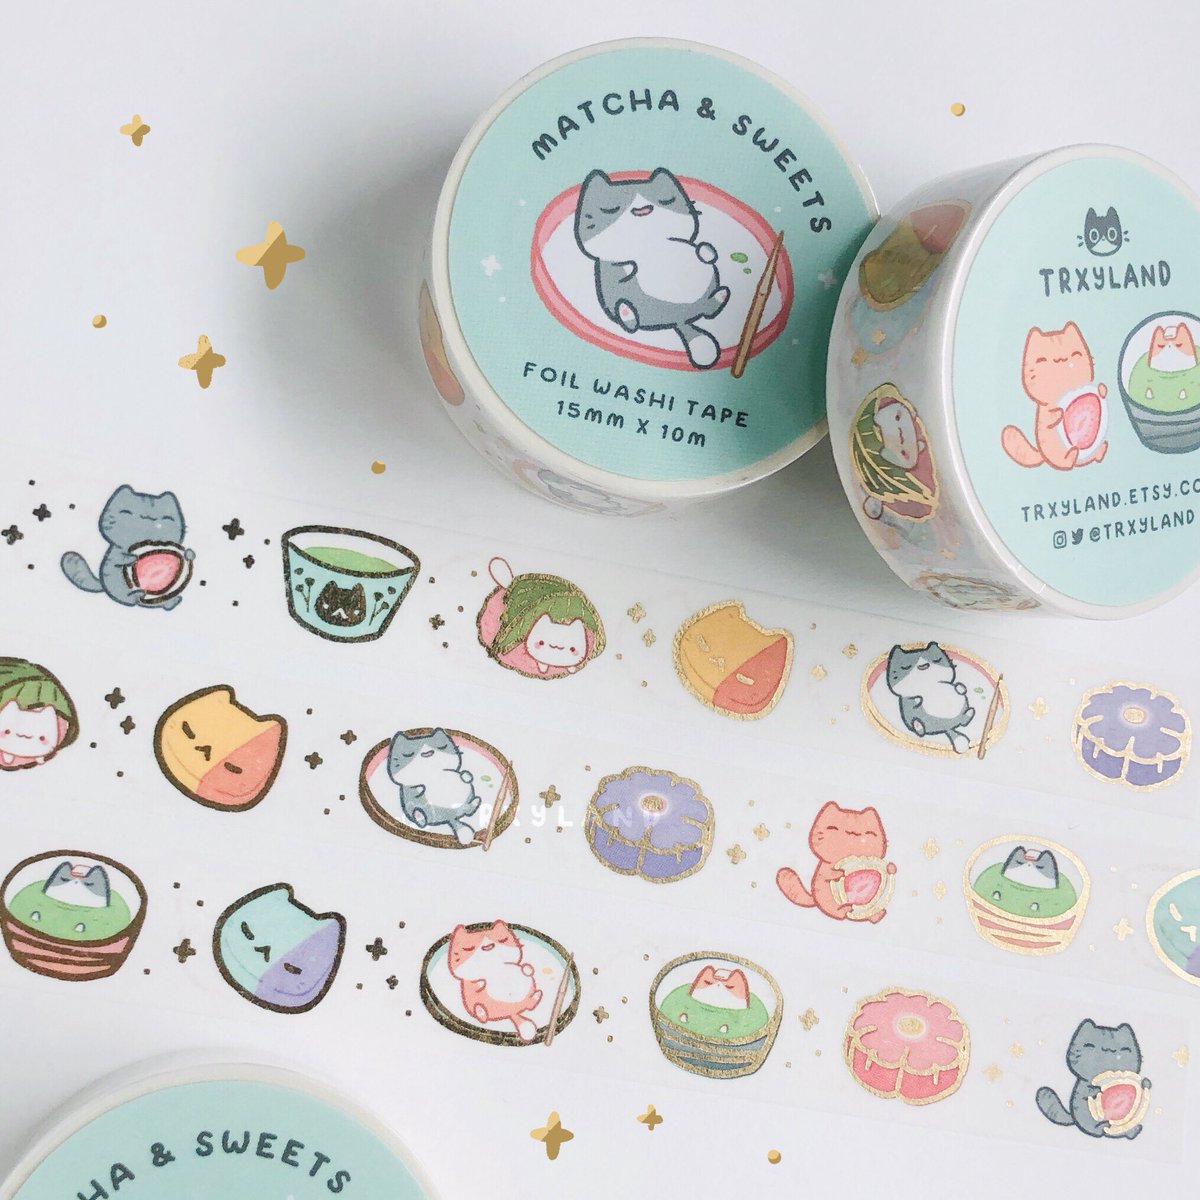 New pins & foil washi coming to my shop on May 23 Sat at 11AM EST!✨ https://t.co/H5lVzOEUkm 